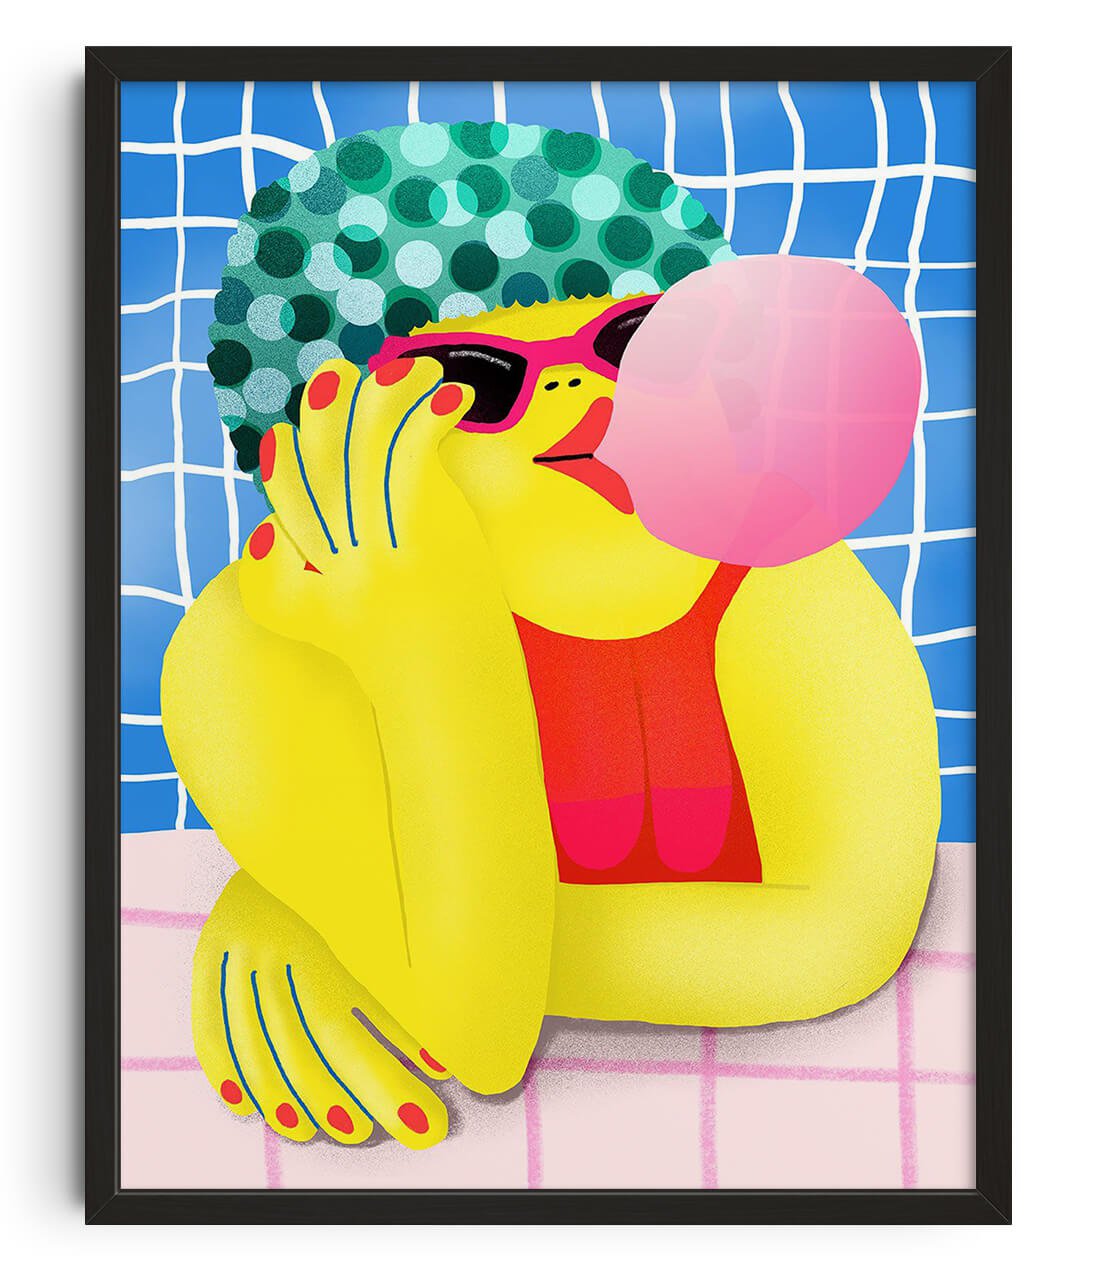 Siesta Frizzante by Nina Bachmann contemporary wall art print from DROOL